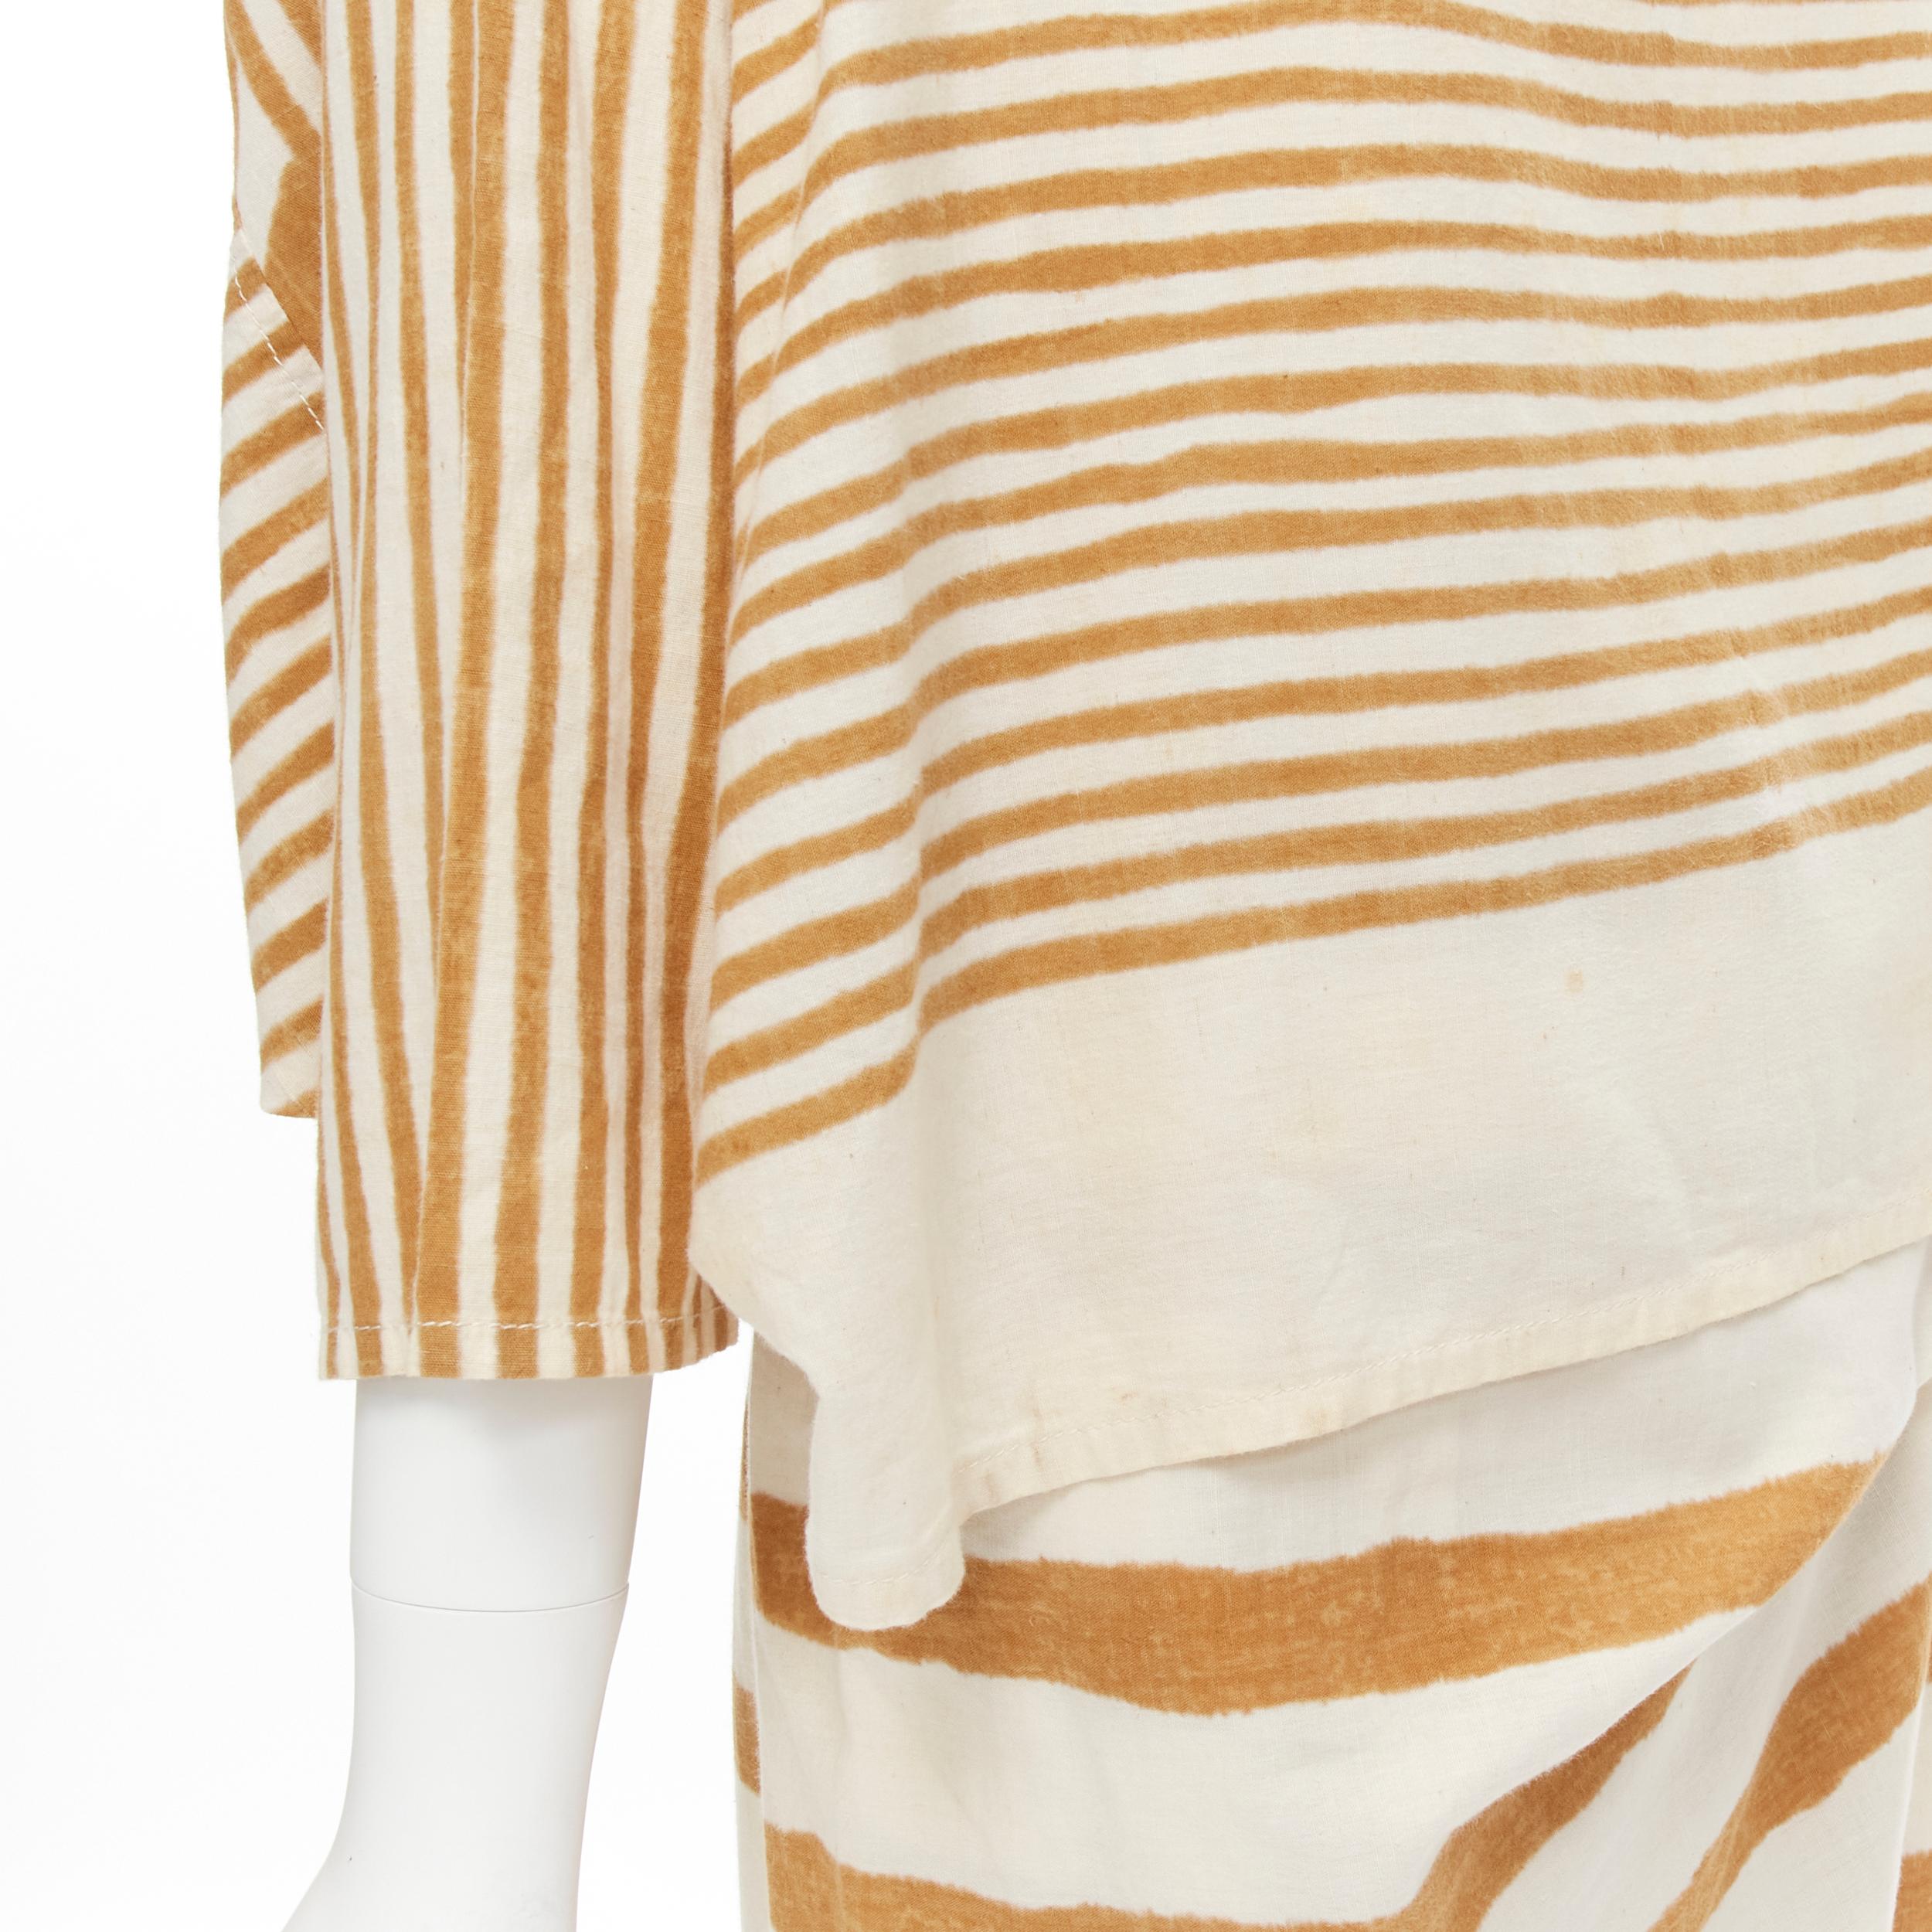 ISSEY MIYAKE 1980's Vintage beige yellow tribal stripe boxy top skirt set For Sale 3